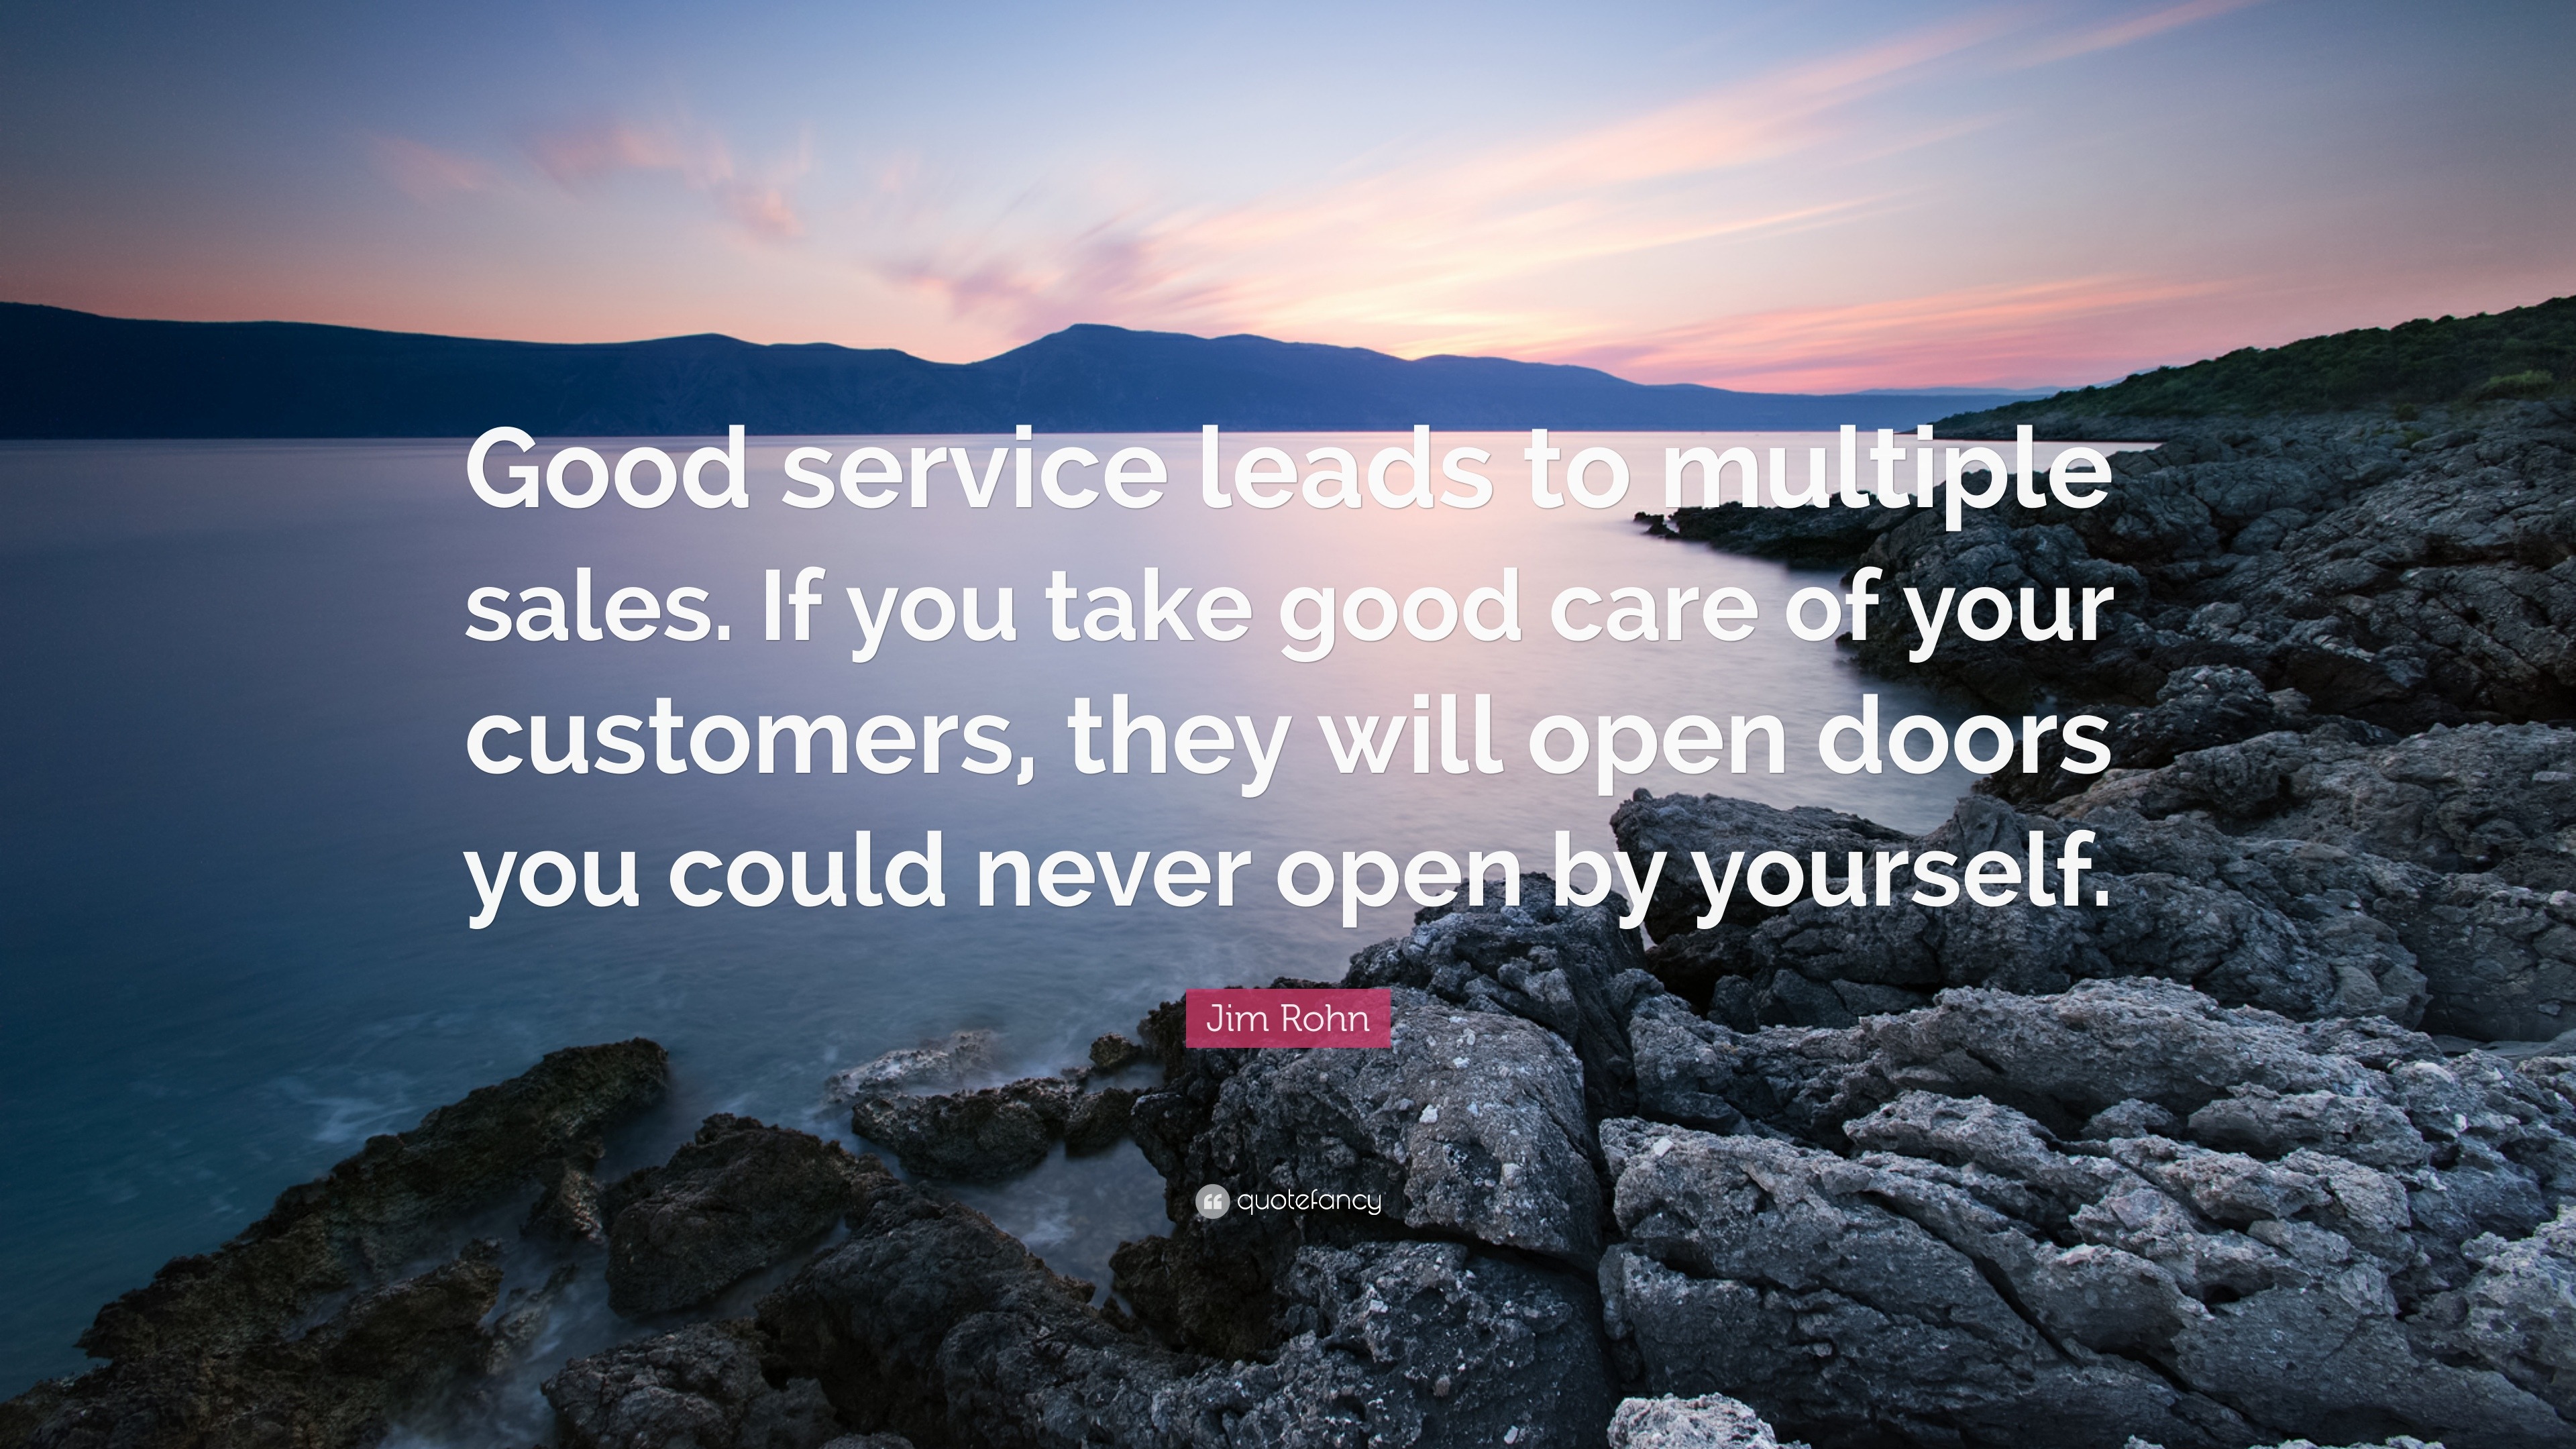 https://quotefancy.com/media/wallpaper/3840x2160/97226-Jim-Rohn-Quote-Good-service-leads-to-multiple-sales-If-you-take.jpg